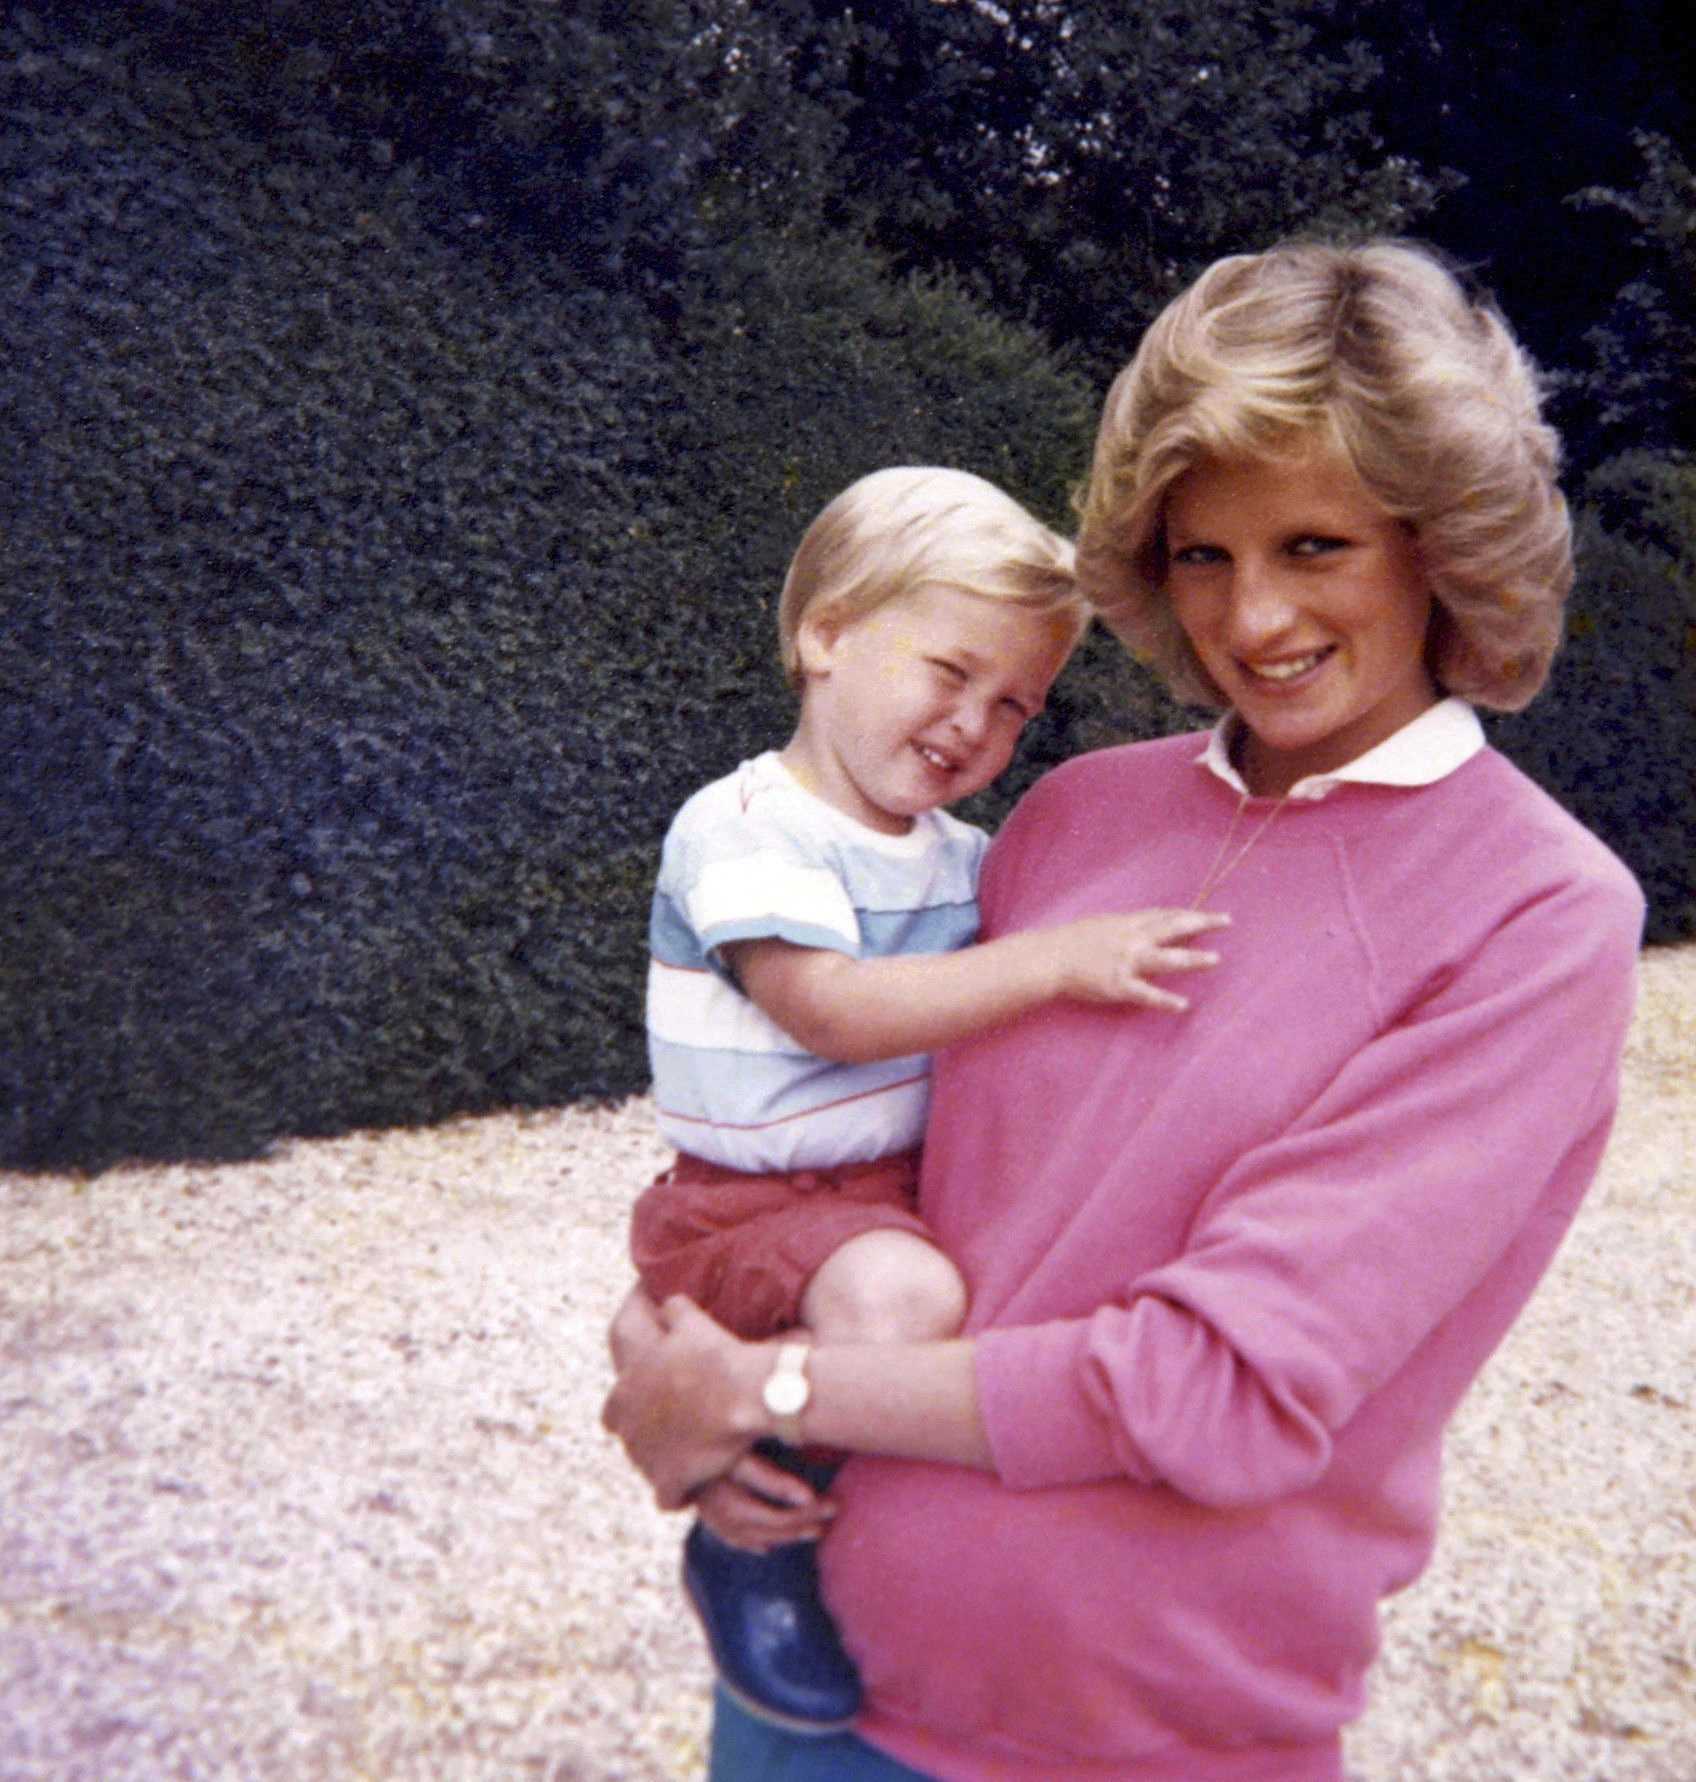 Documentary set to air Princess Diana's recordings on marriage to Charles